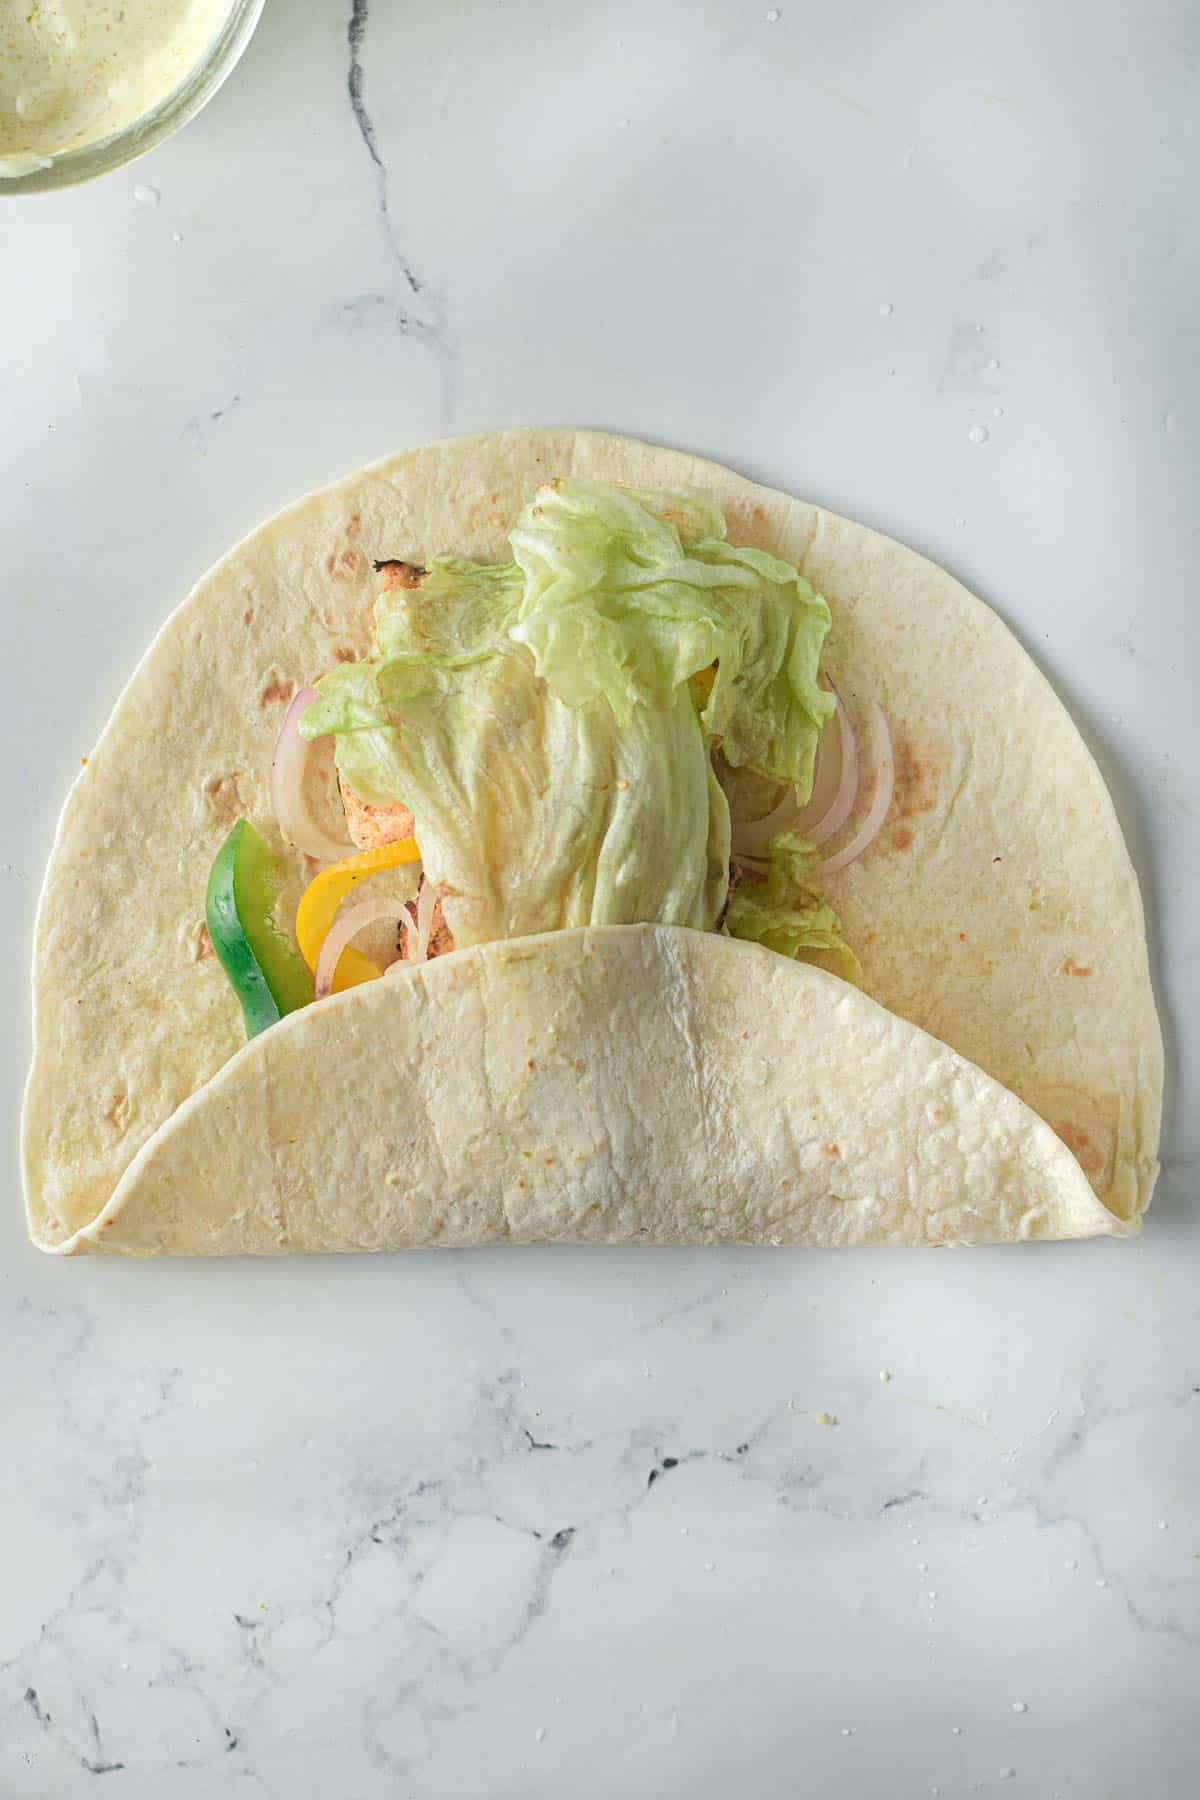 A chicken tikka wrap cooked in an air fryer on a white surface.